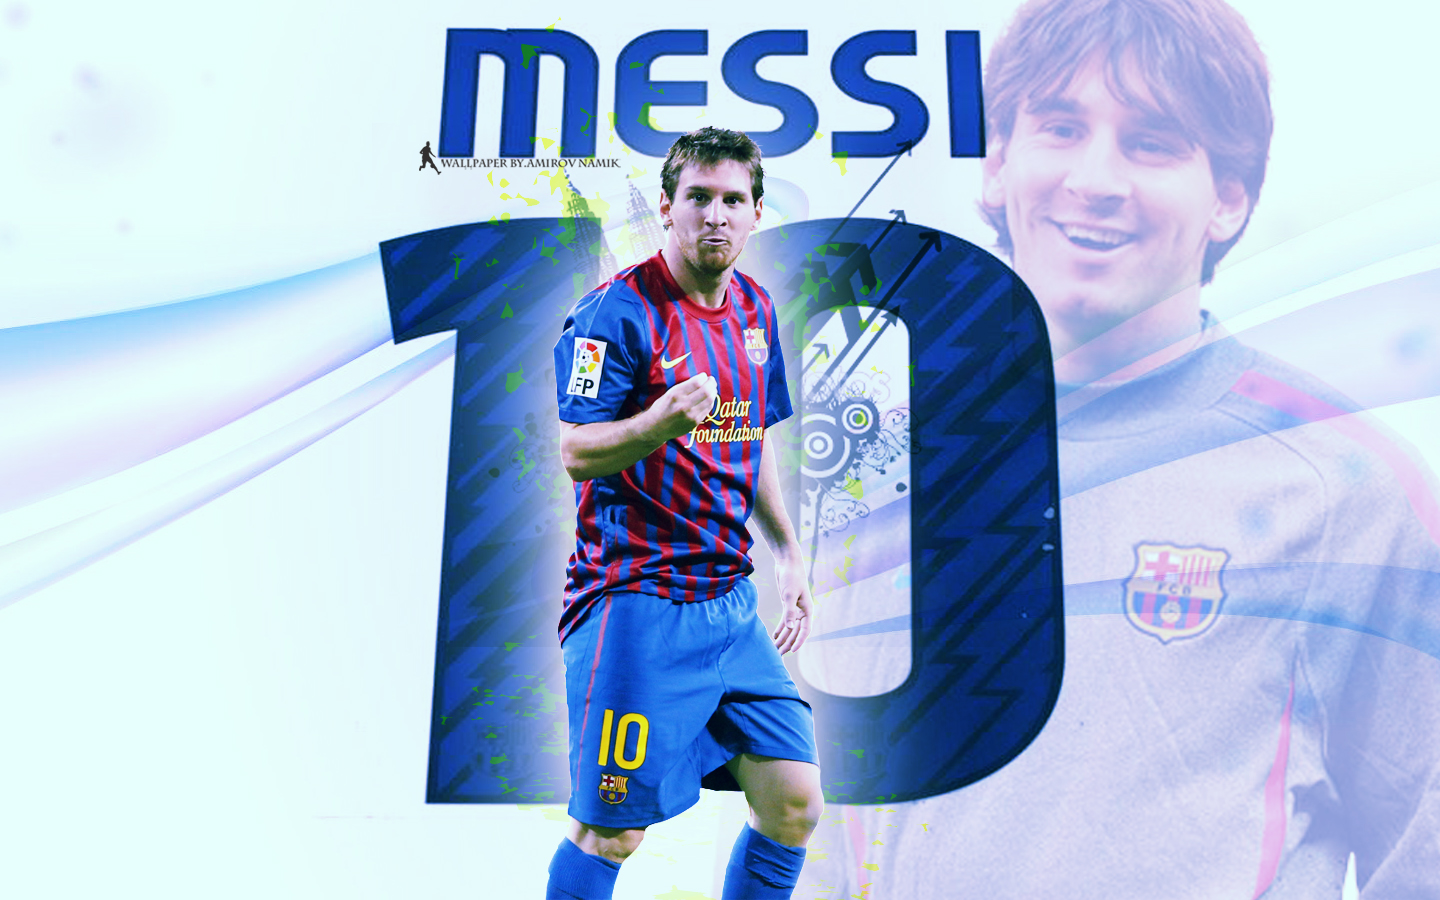 Lionel Messi Latest HD Wallpapers 2012-2013 | Lionel Messi ...